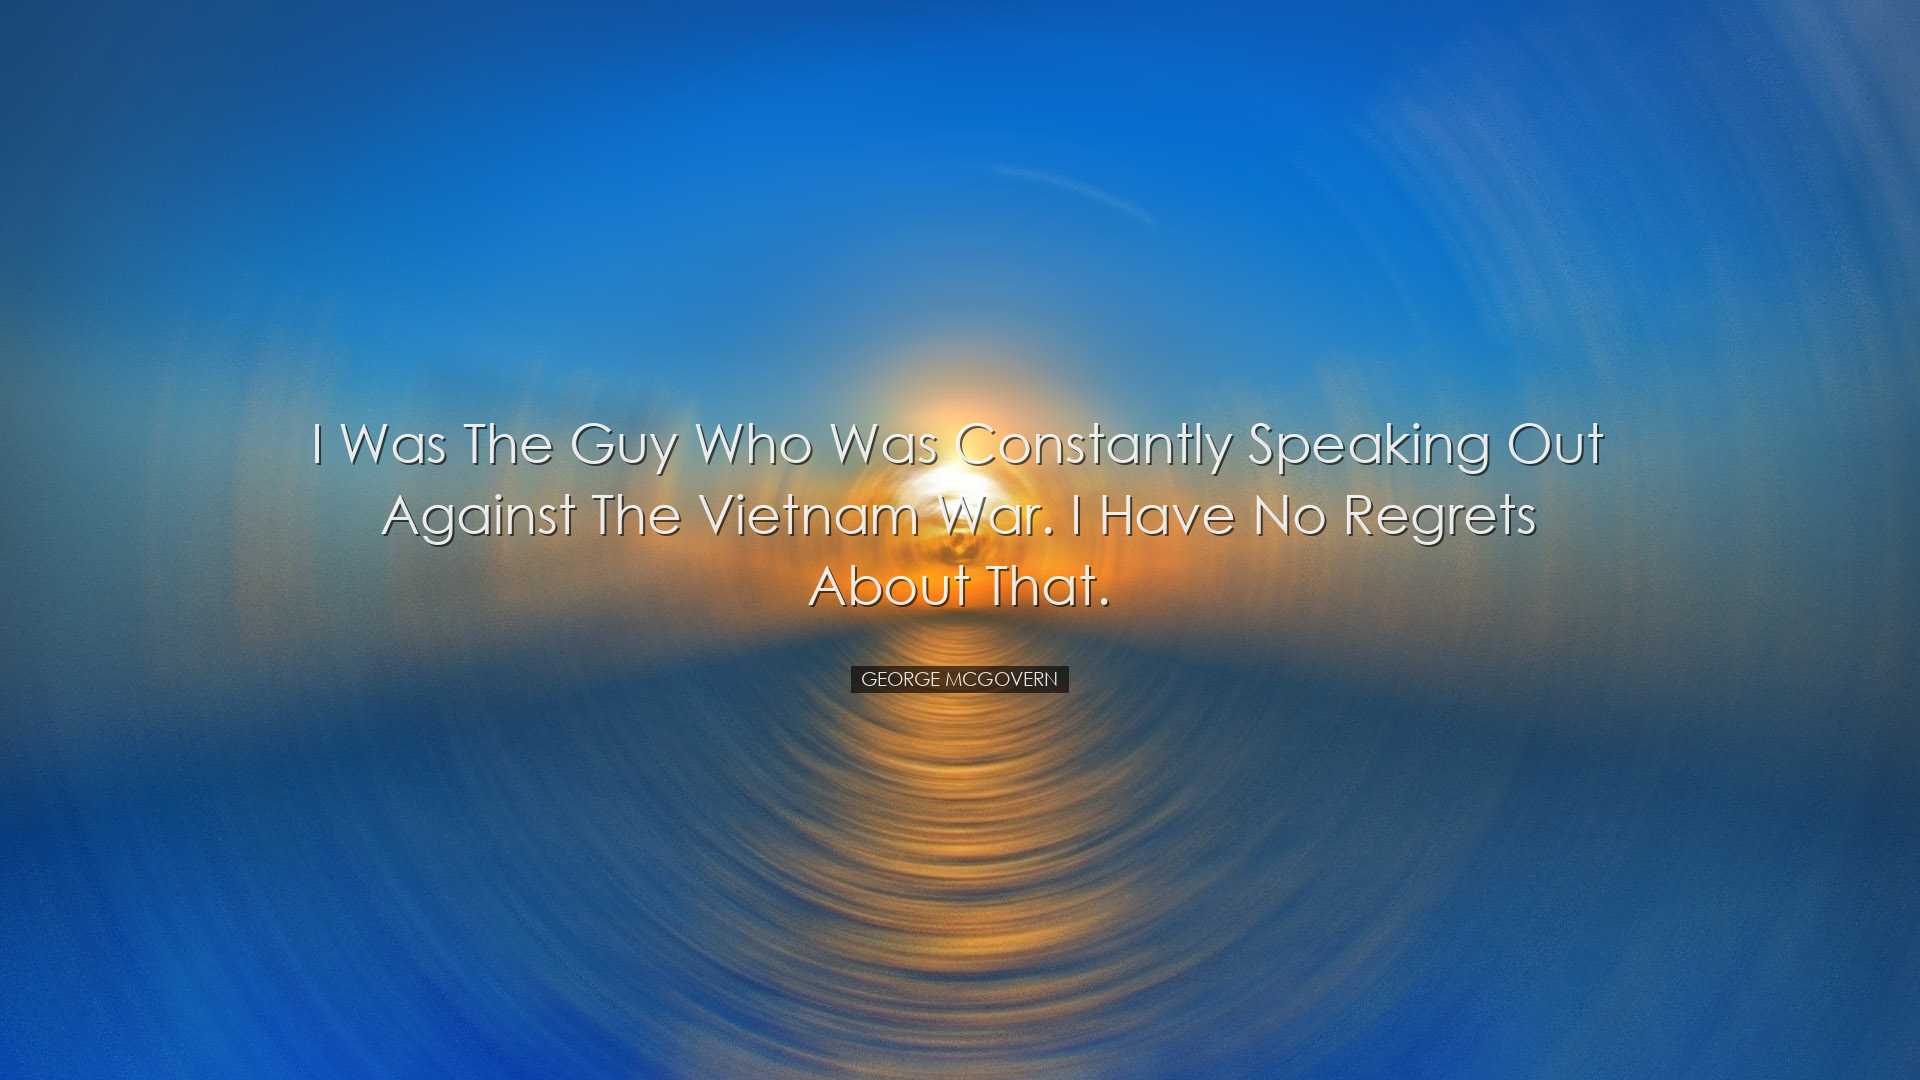 I was the guy who was constantly speaking out against the Vietnam